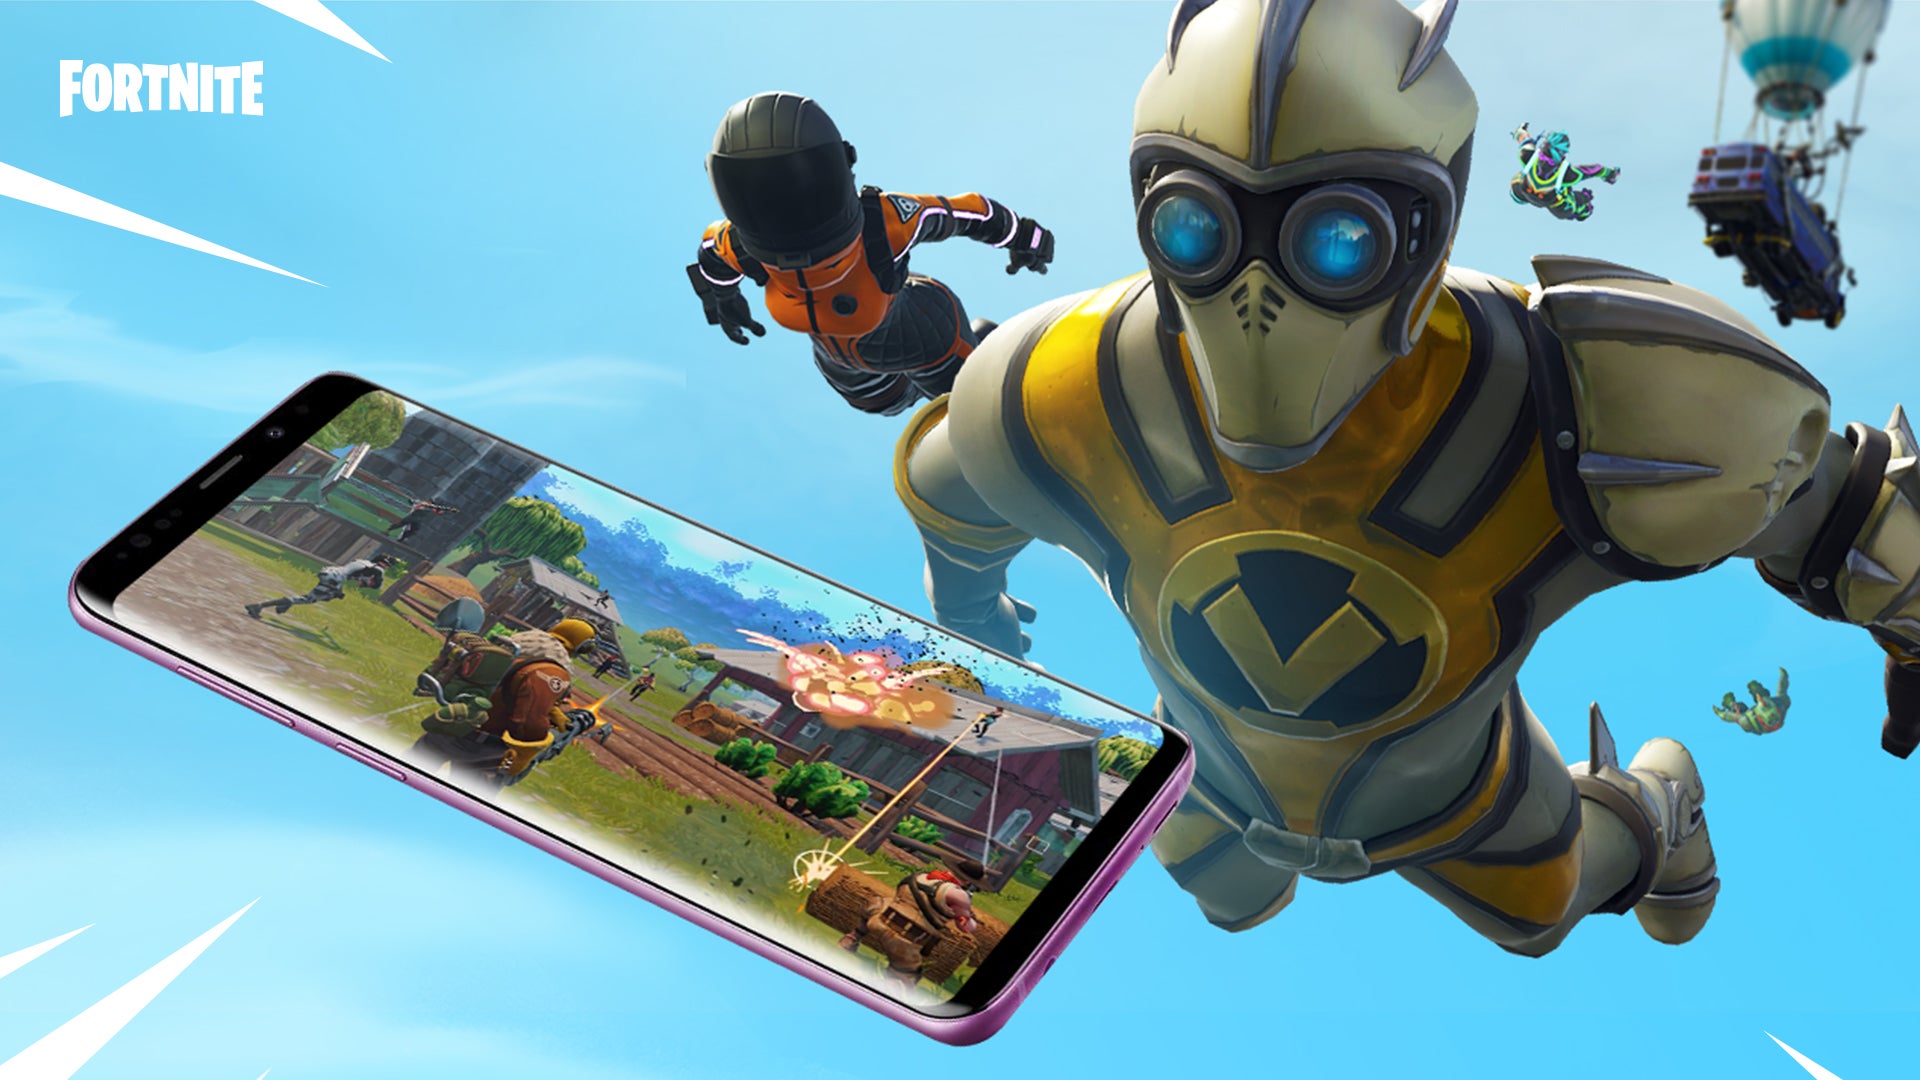 Image for Google reveals Fortnite Android vulnerability, Epic calls move "irresponsible"